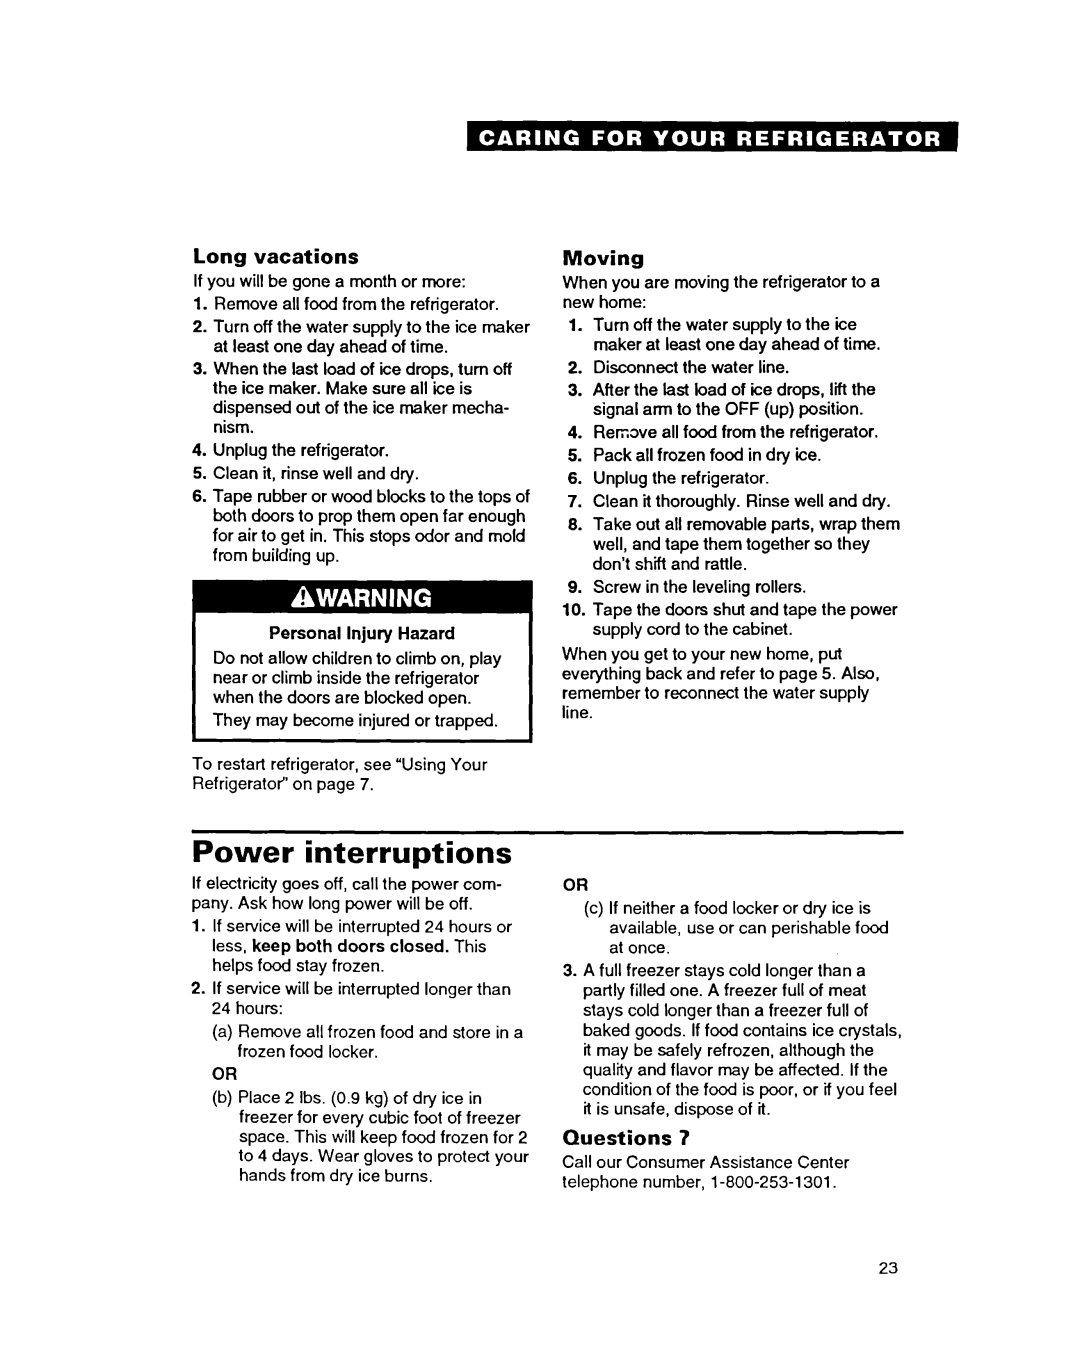 Whirlpool ED22PC Power interruptions, Long vacations, Moving, Questions, Personal Injury Hazard 